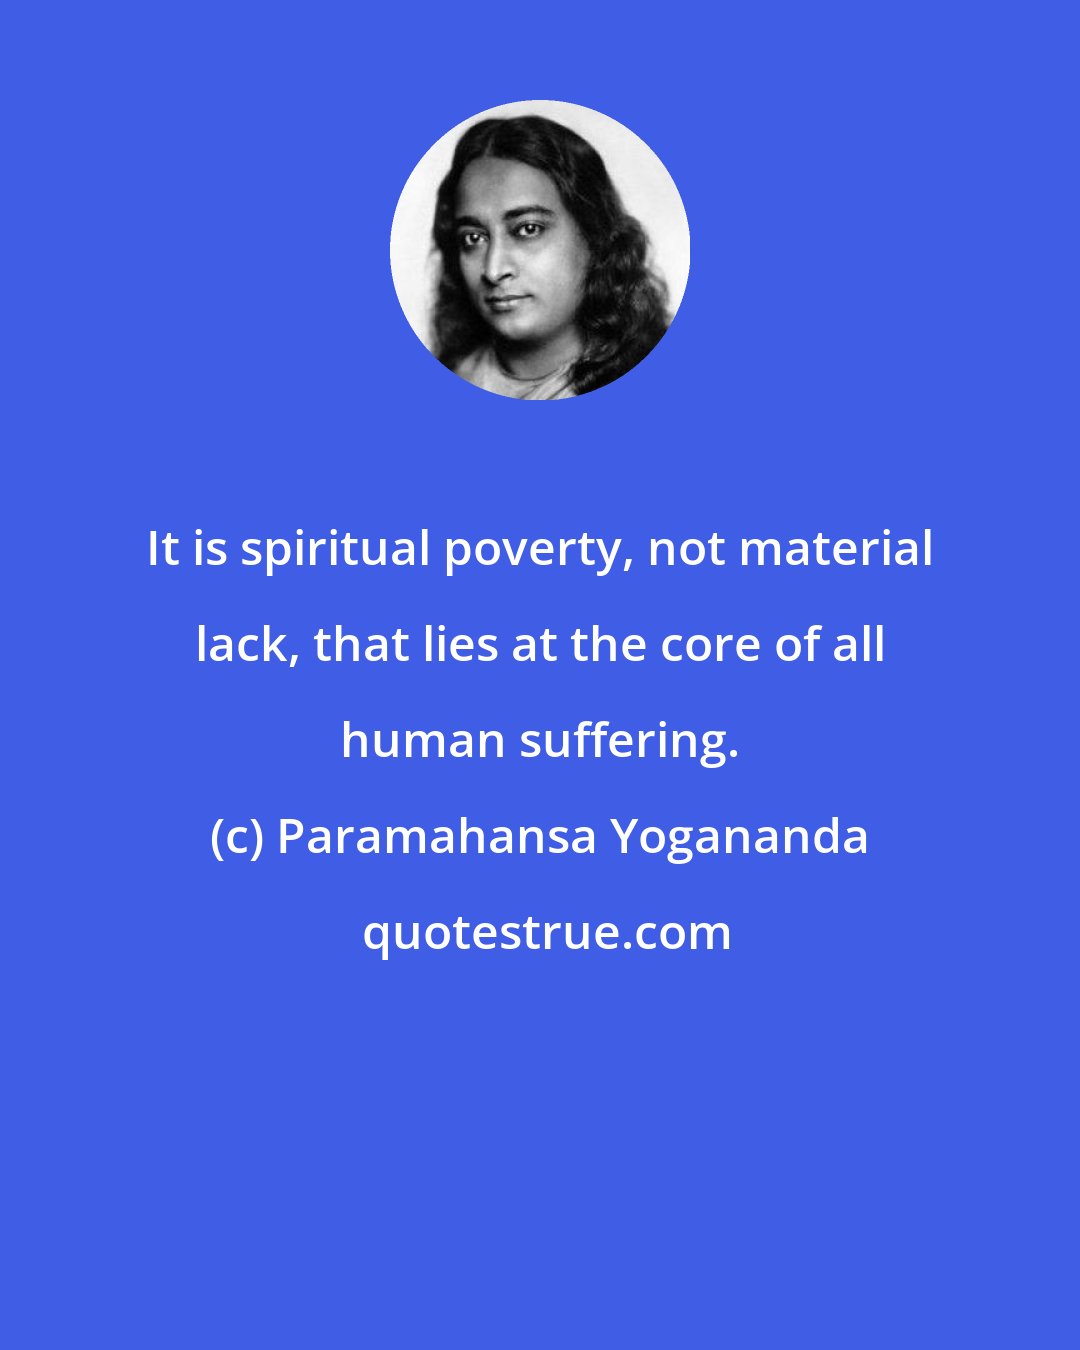 Paramahansa Yogananda: It is spiritual poverty, not material lack, that lies at the core of all human suffering.